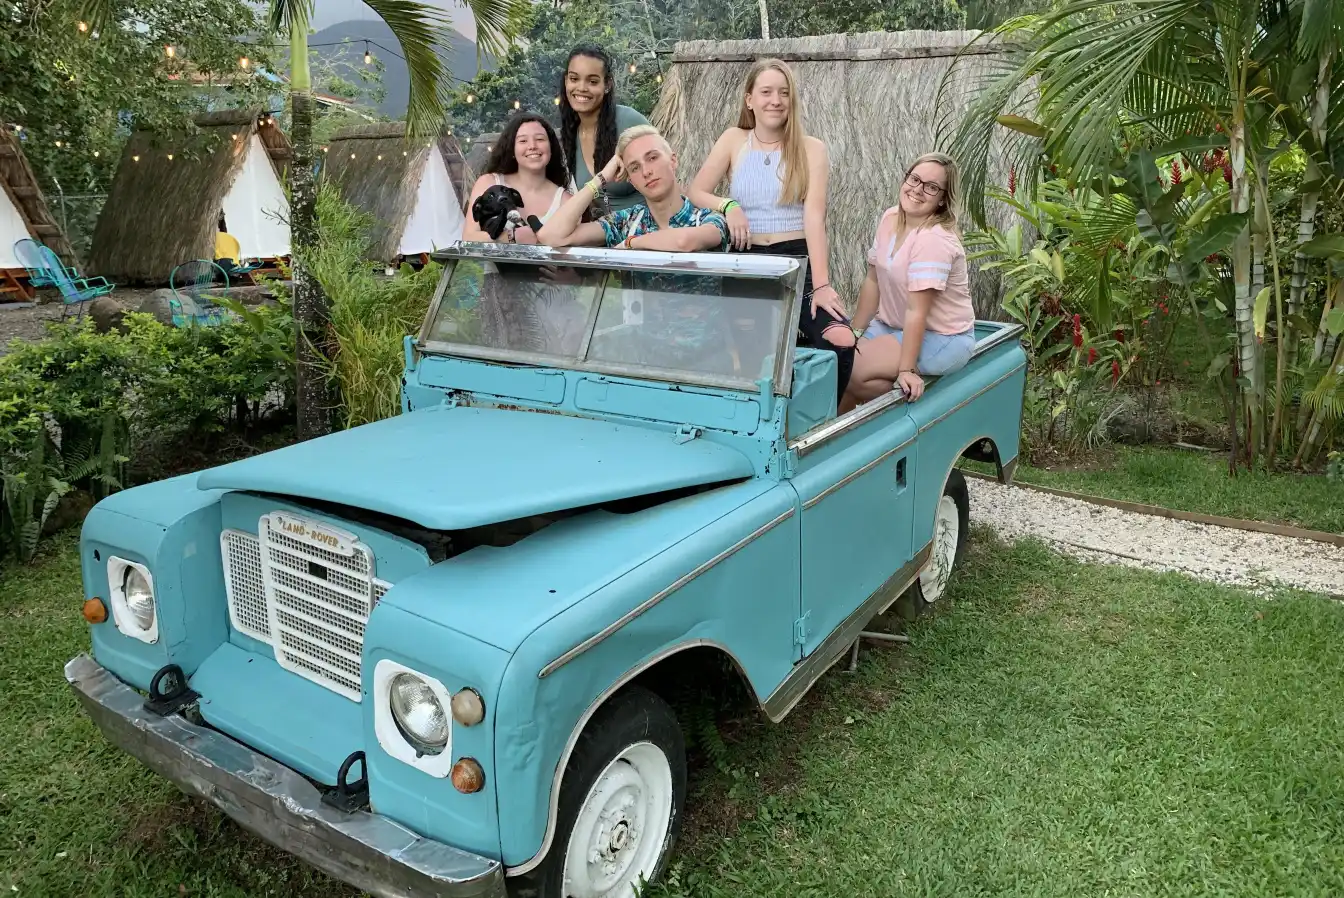 Students smiling and posing in a vintage baby blue truck while studying abroad in Costa Rica